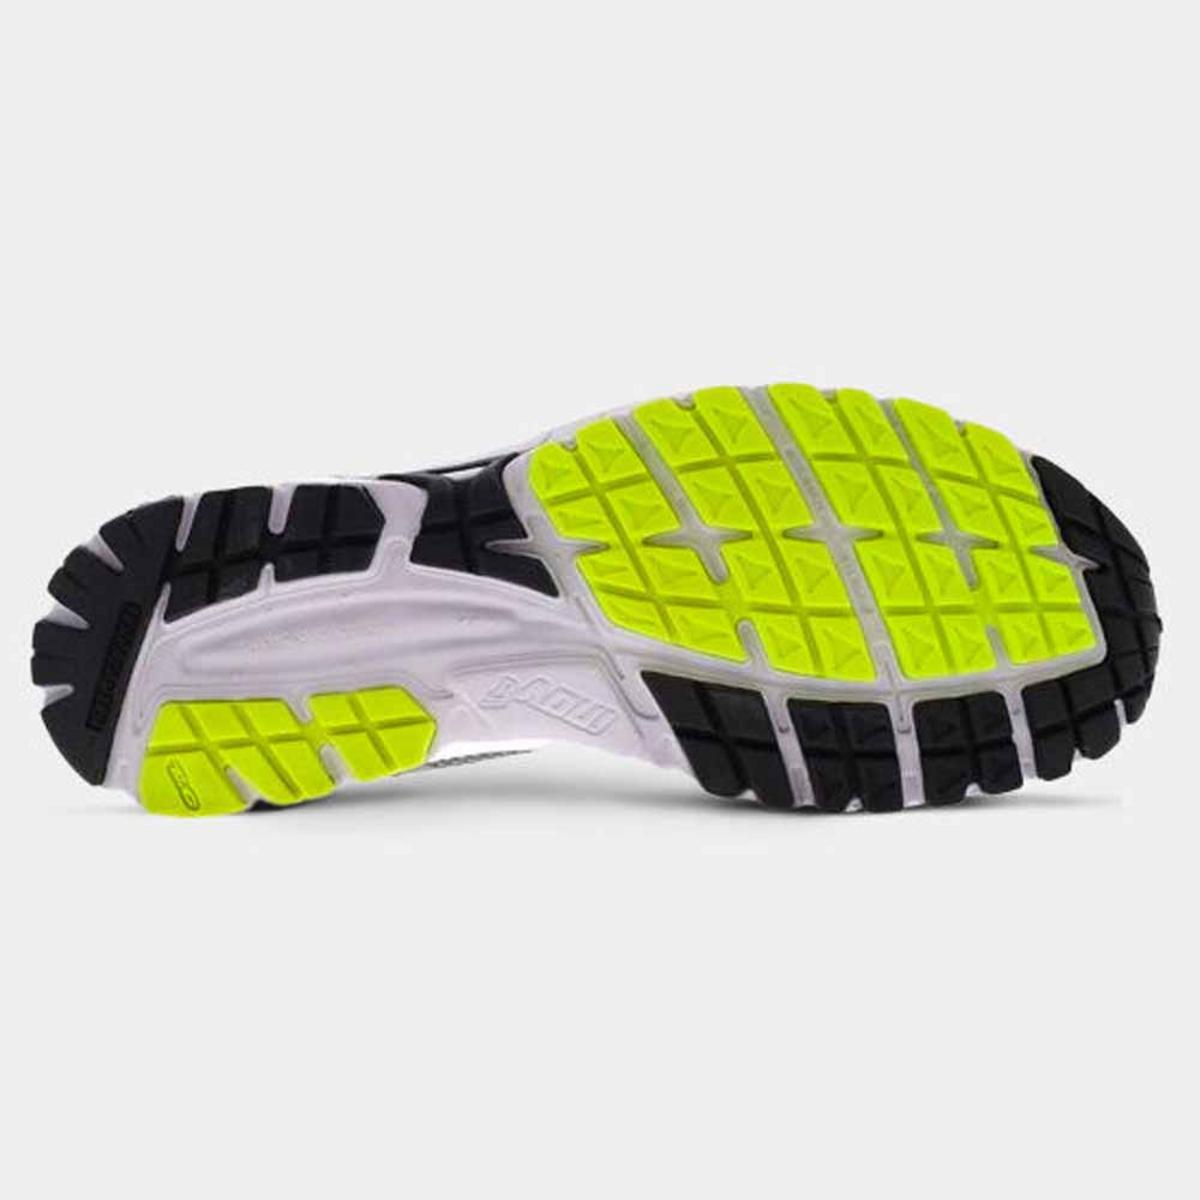 Inov-8 Men's Roadclaw 275 Knit Running Shoes